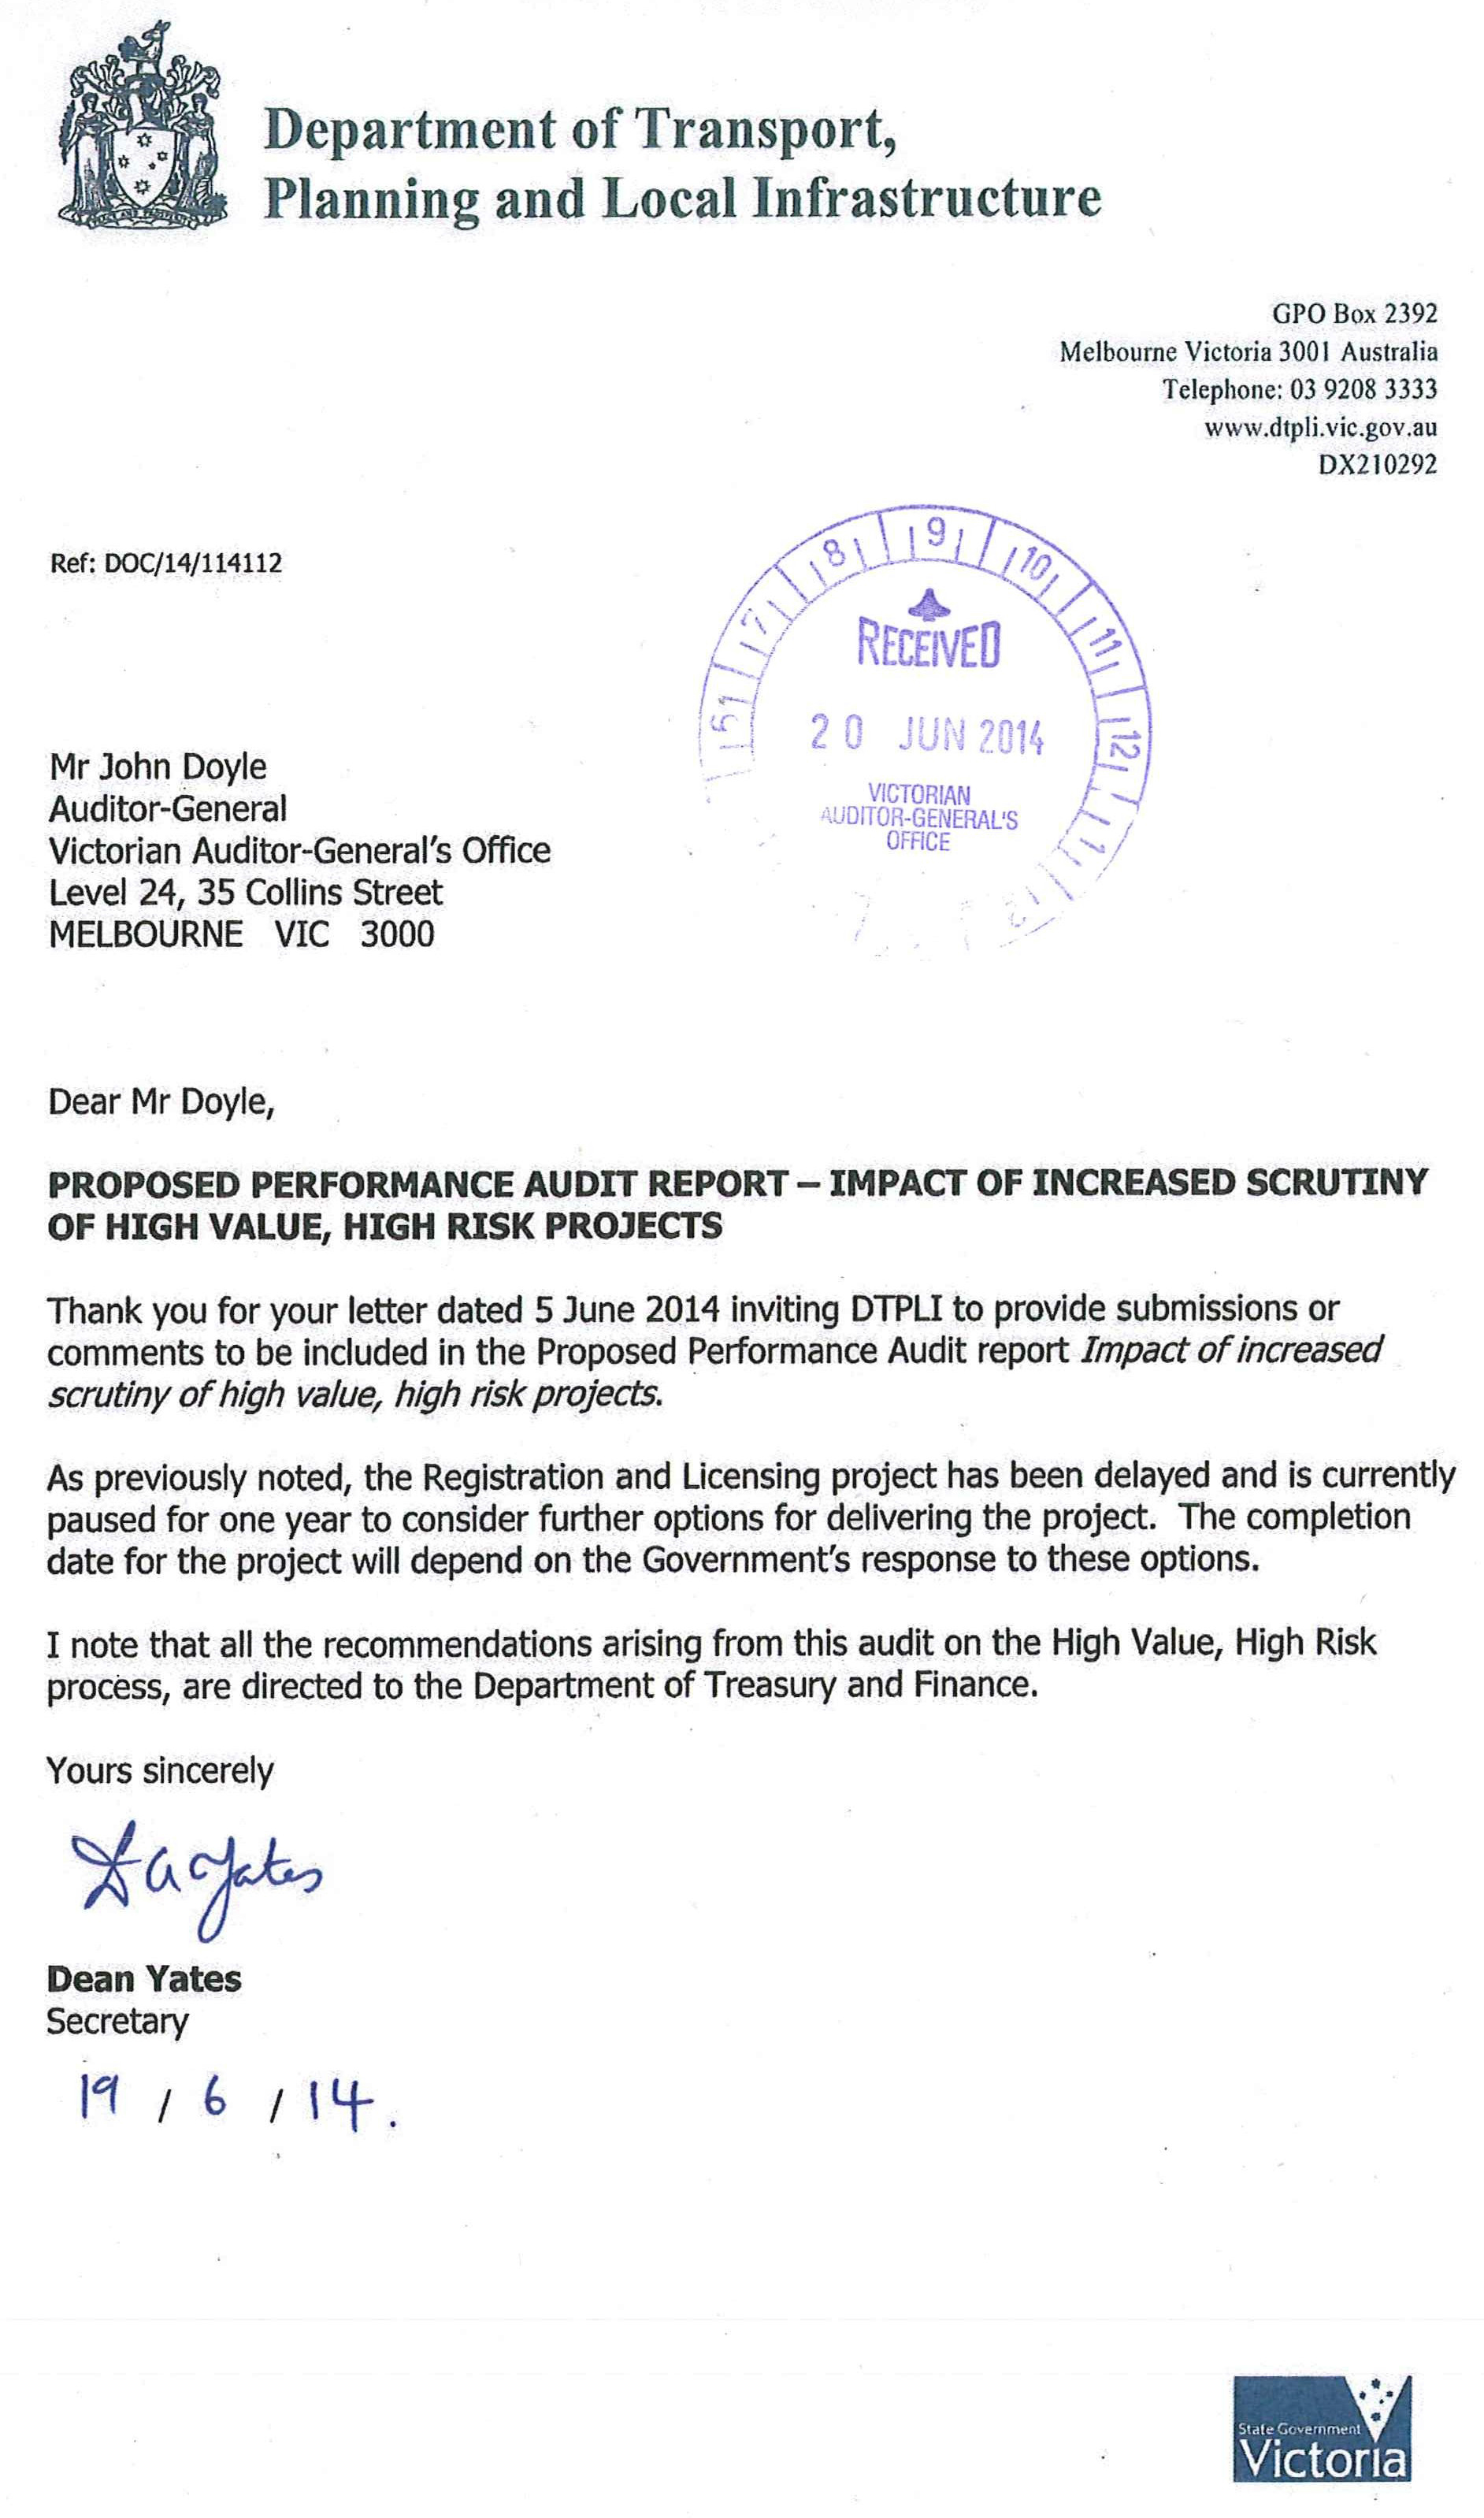 Image shows response provided by the Secretary, Department of Transport, Planning and Local Infrastructure